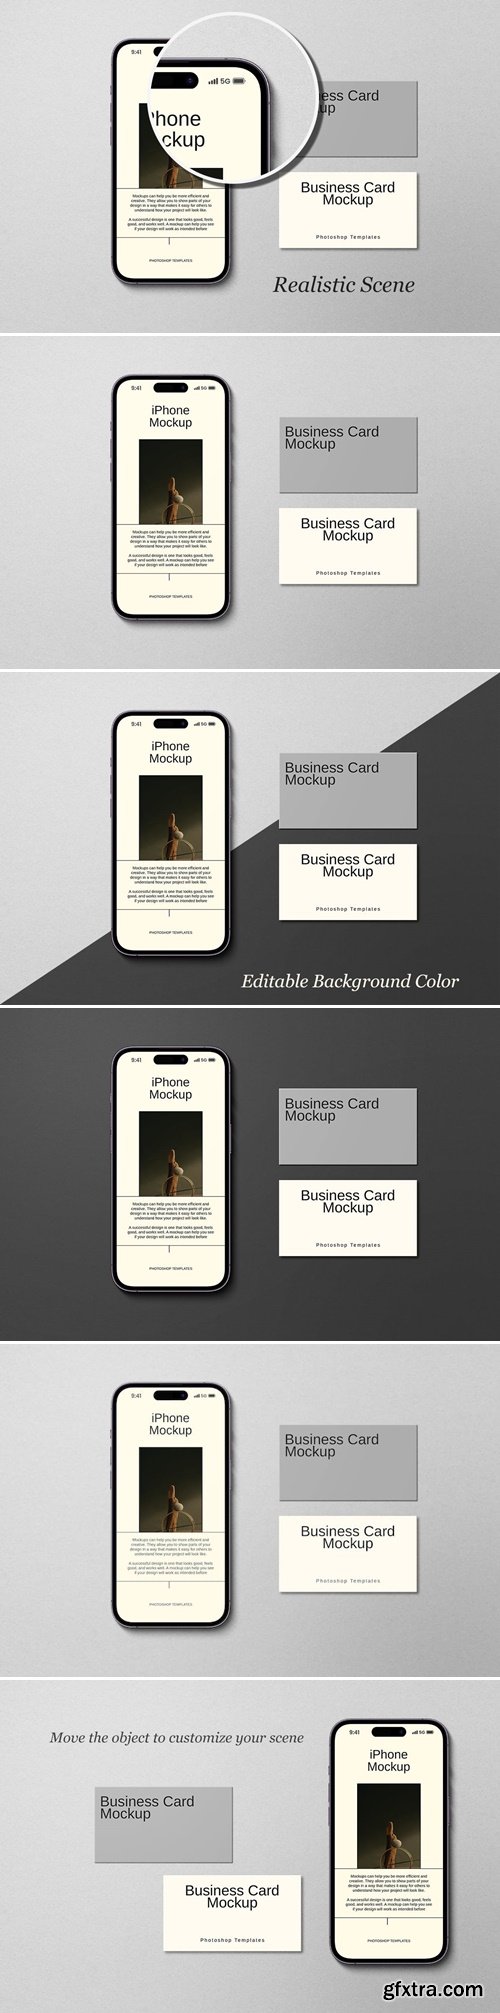 iPhone 14 Pro Max and Business Card Mockup DPMUYHJ